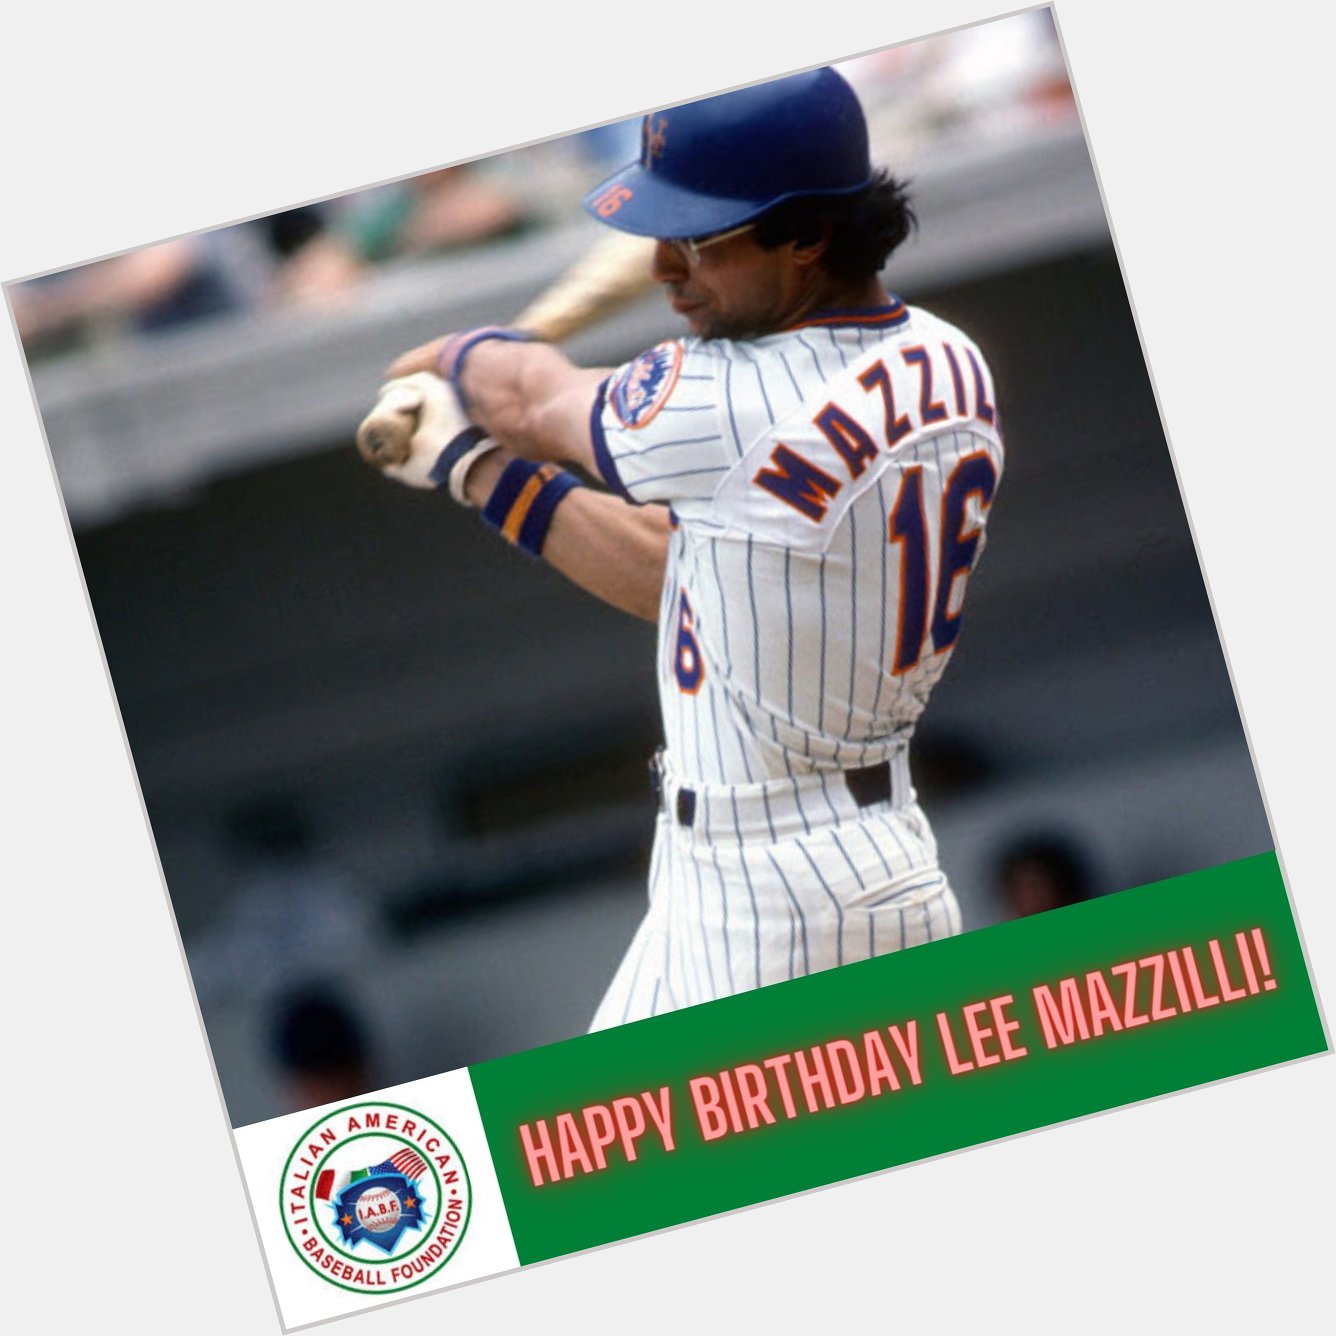 BUON COMPLEANNO: Happy Birthday, Lee Mazzilli, our 2020 IABF Guest of Honor!     